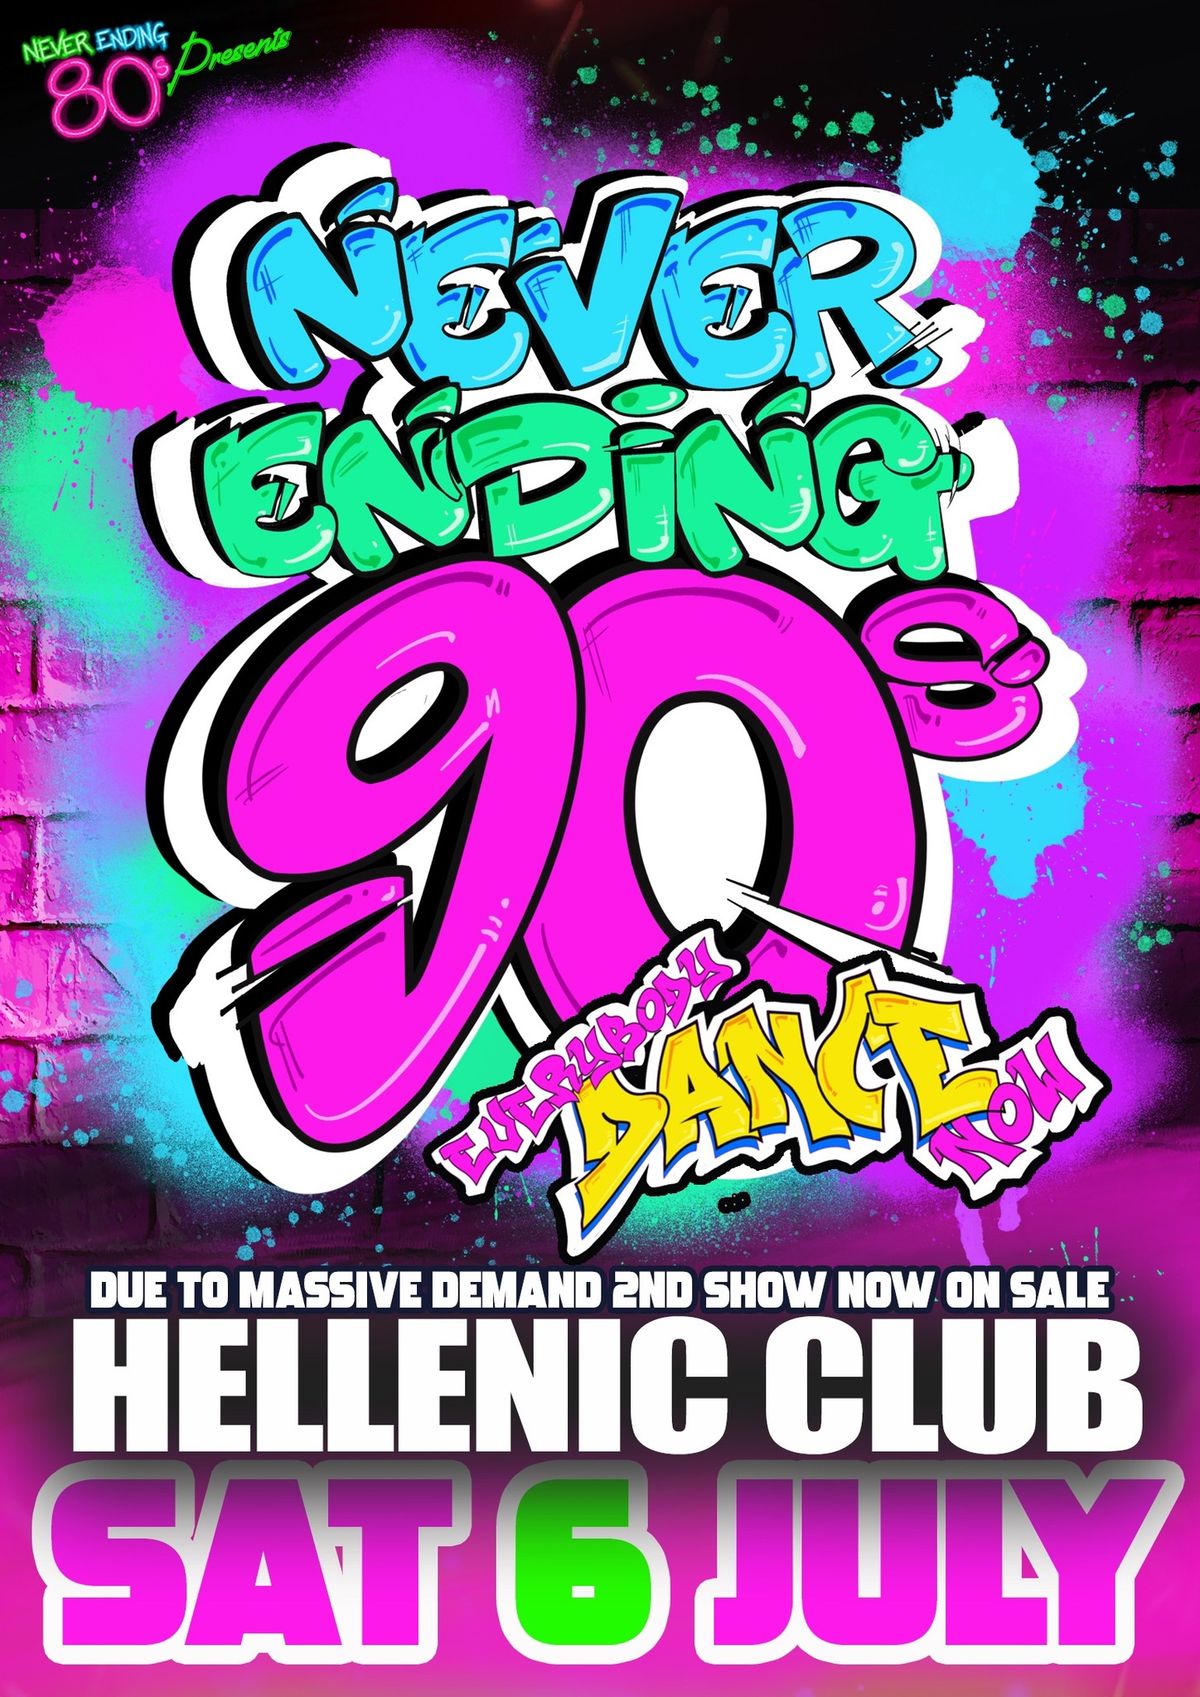 Never Ending 90s Party RETURN SHOW- Hellenic Club Canberra